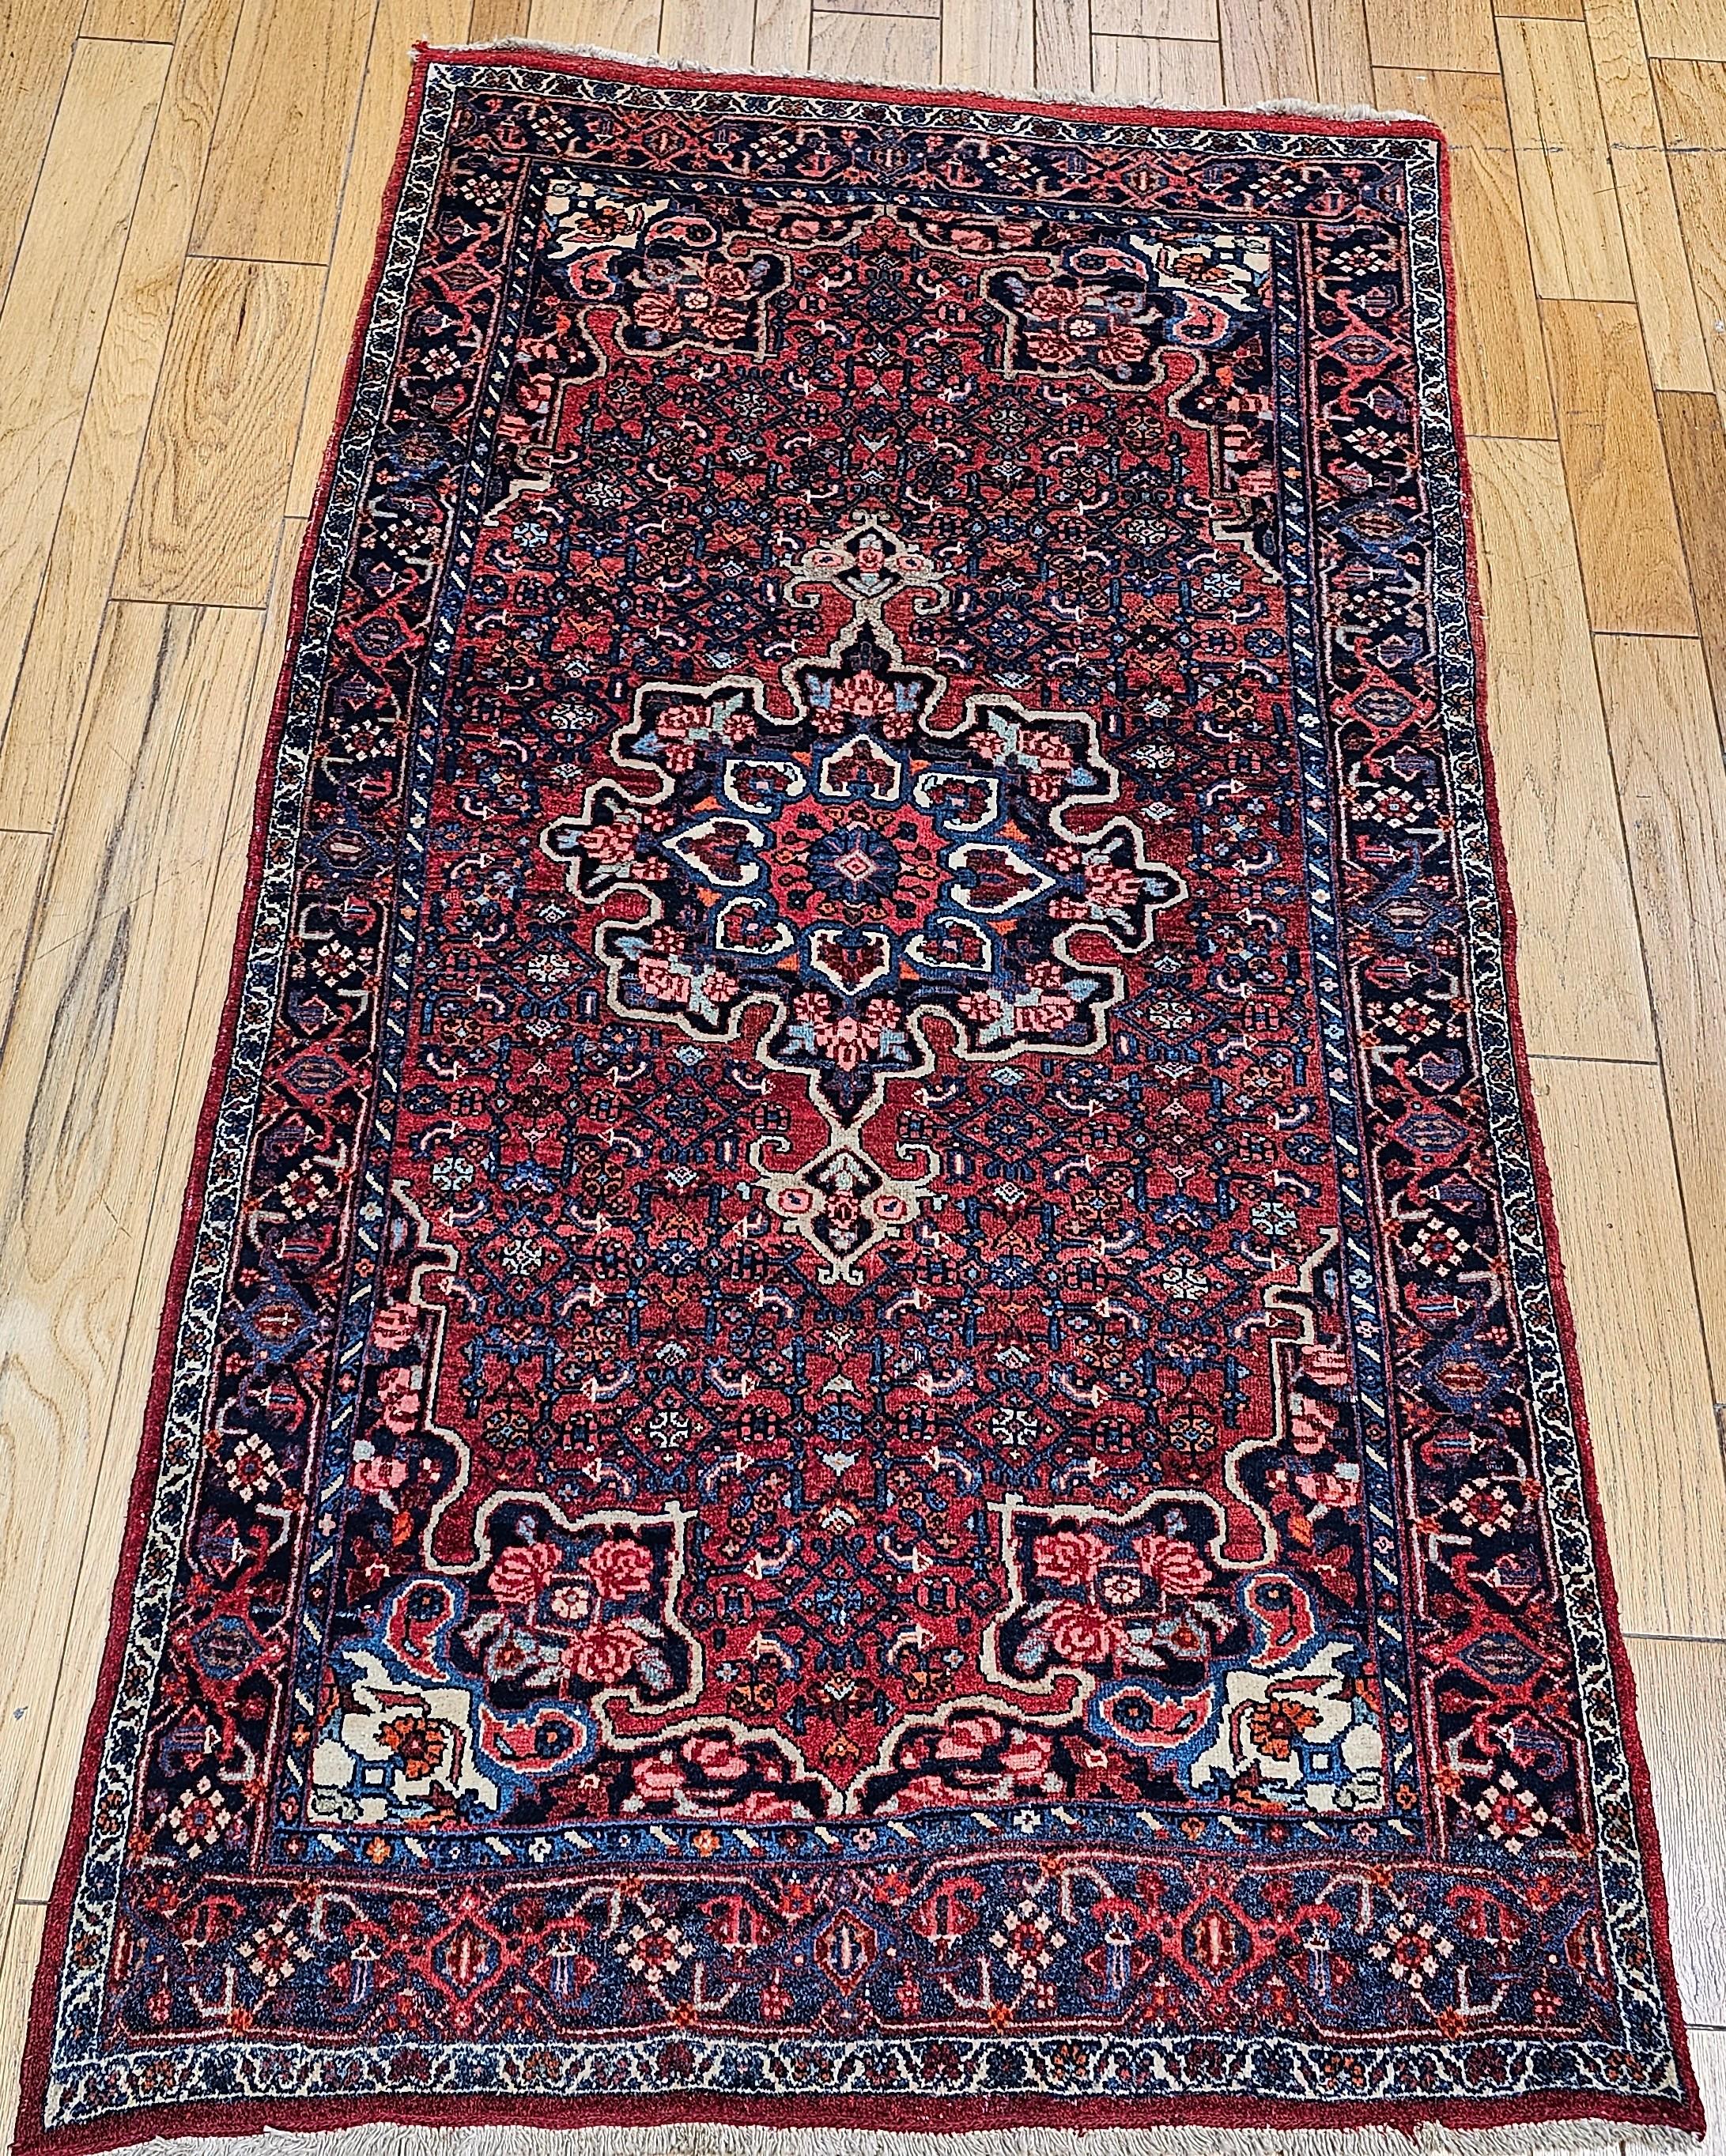 Vintage Persian Bidar area or gallery rug in a medallion floral pattern from the early 1900s.  The carpet has a central medallion and anchor pendants rendered in blues, reds, ivory, and pink with a dark gold outline.  The corners have four rose